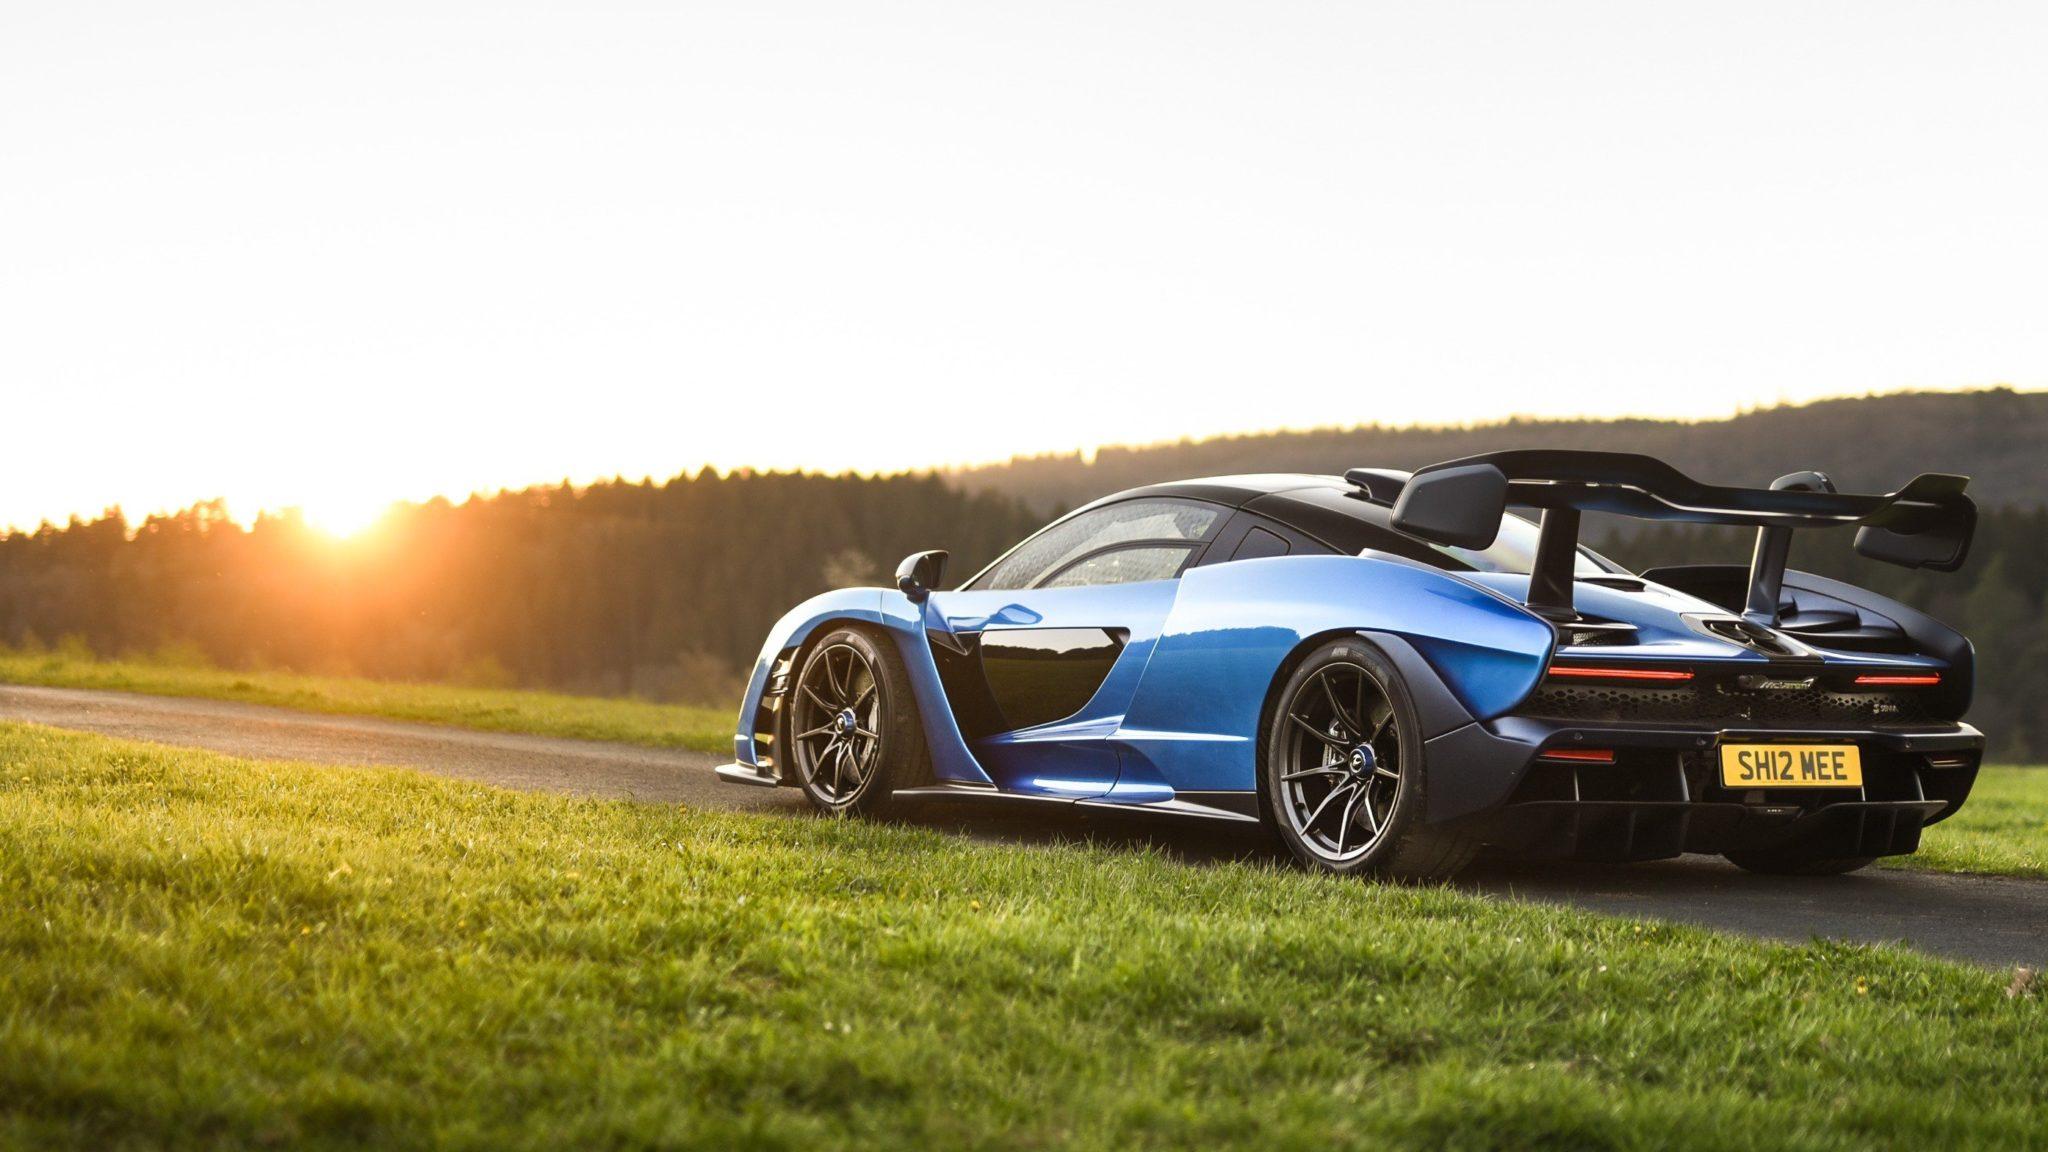 Shmee's blue McLaren Senna could fetch over £1 million if he sold it in 2020.